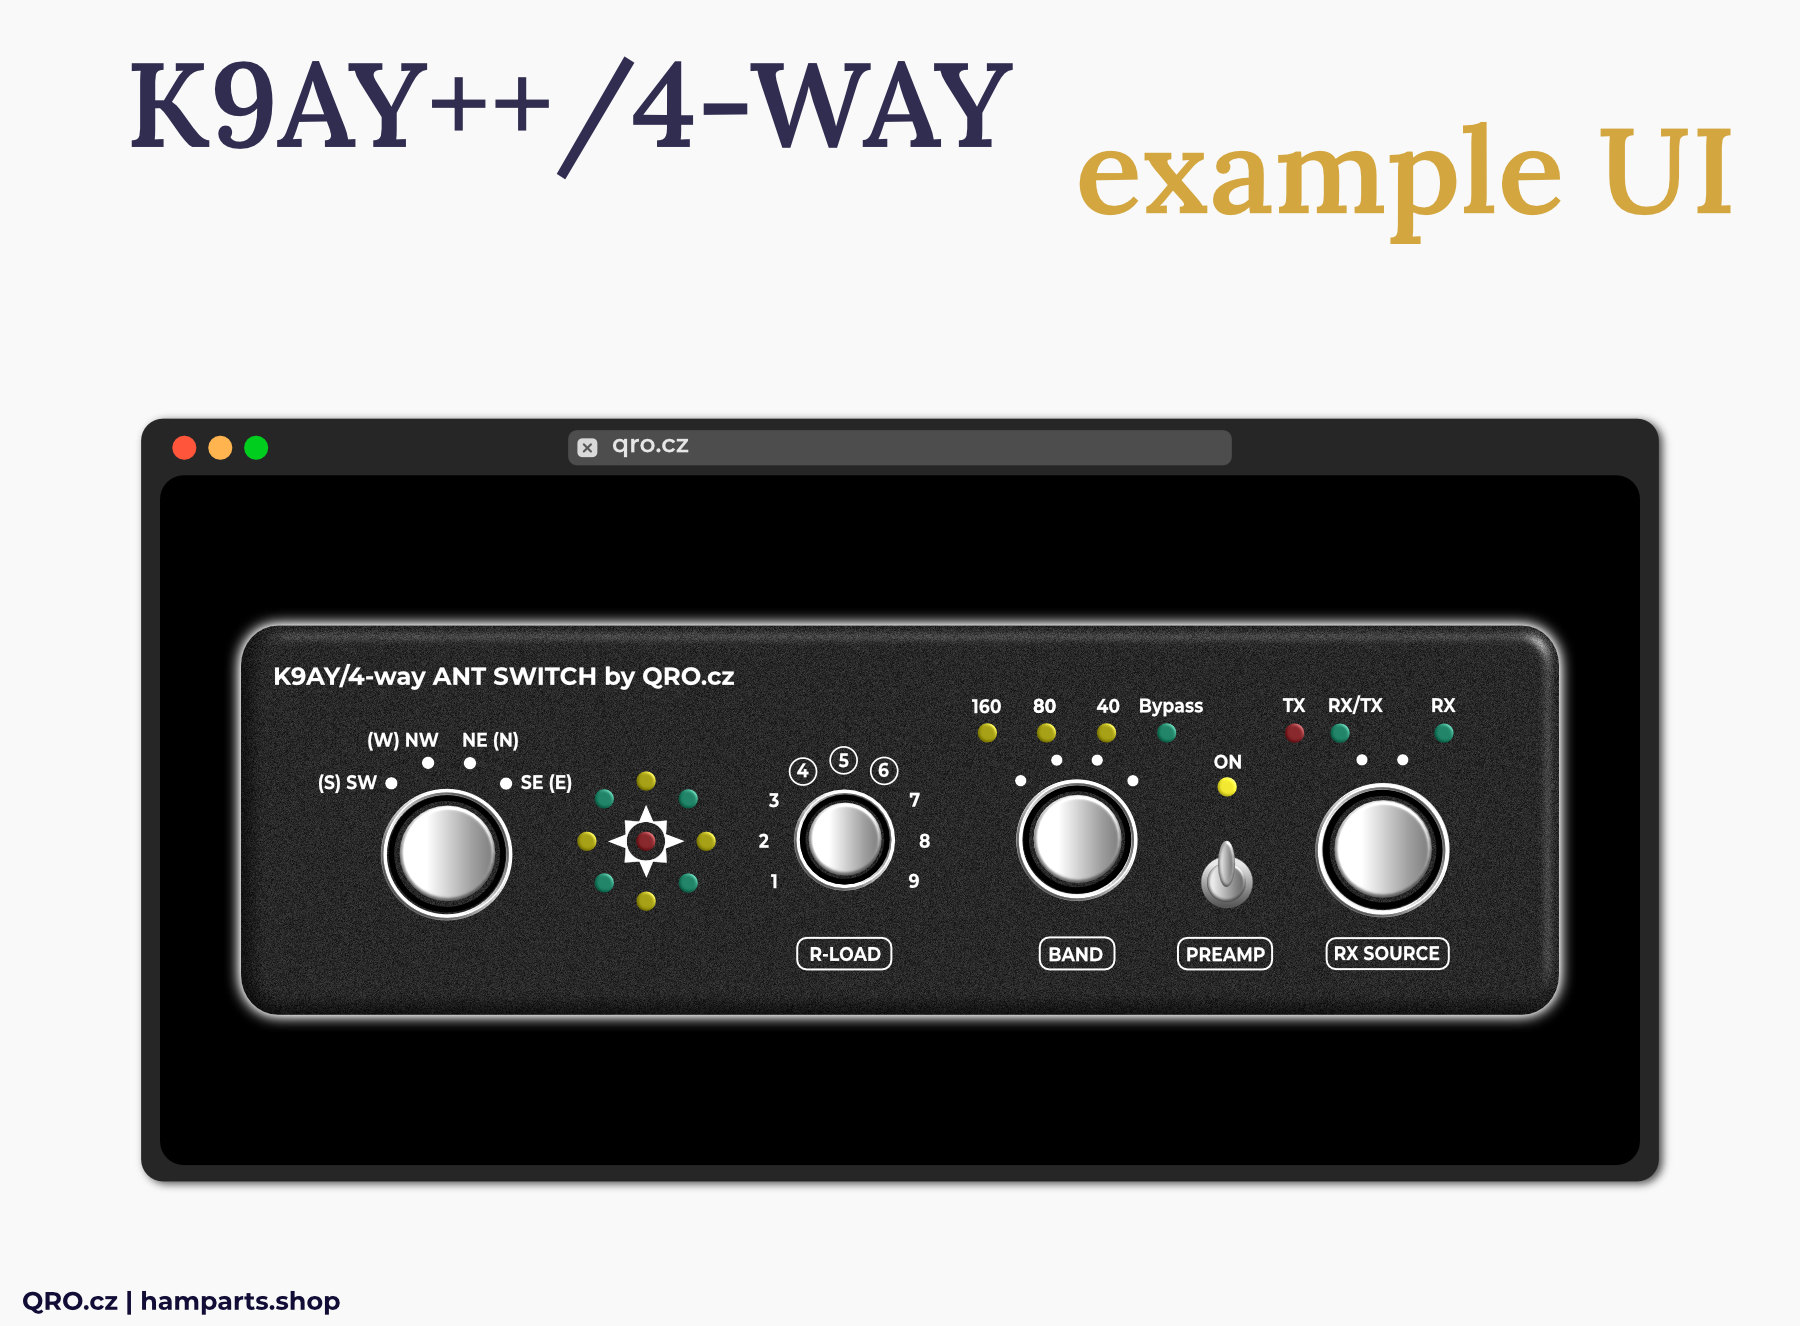 remote control options K9AY/4-way controller example by qro.cz hamparts.shop